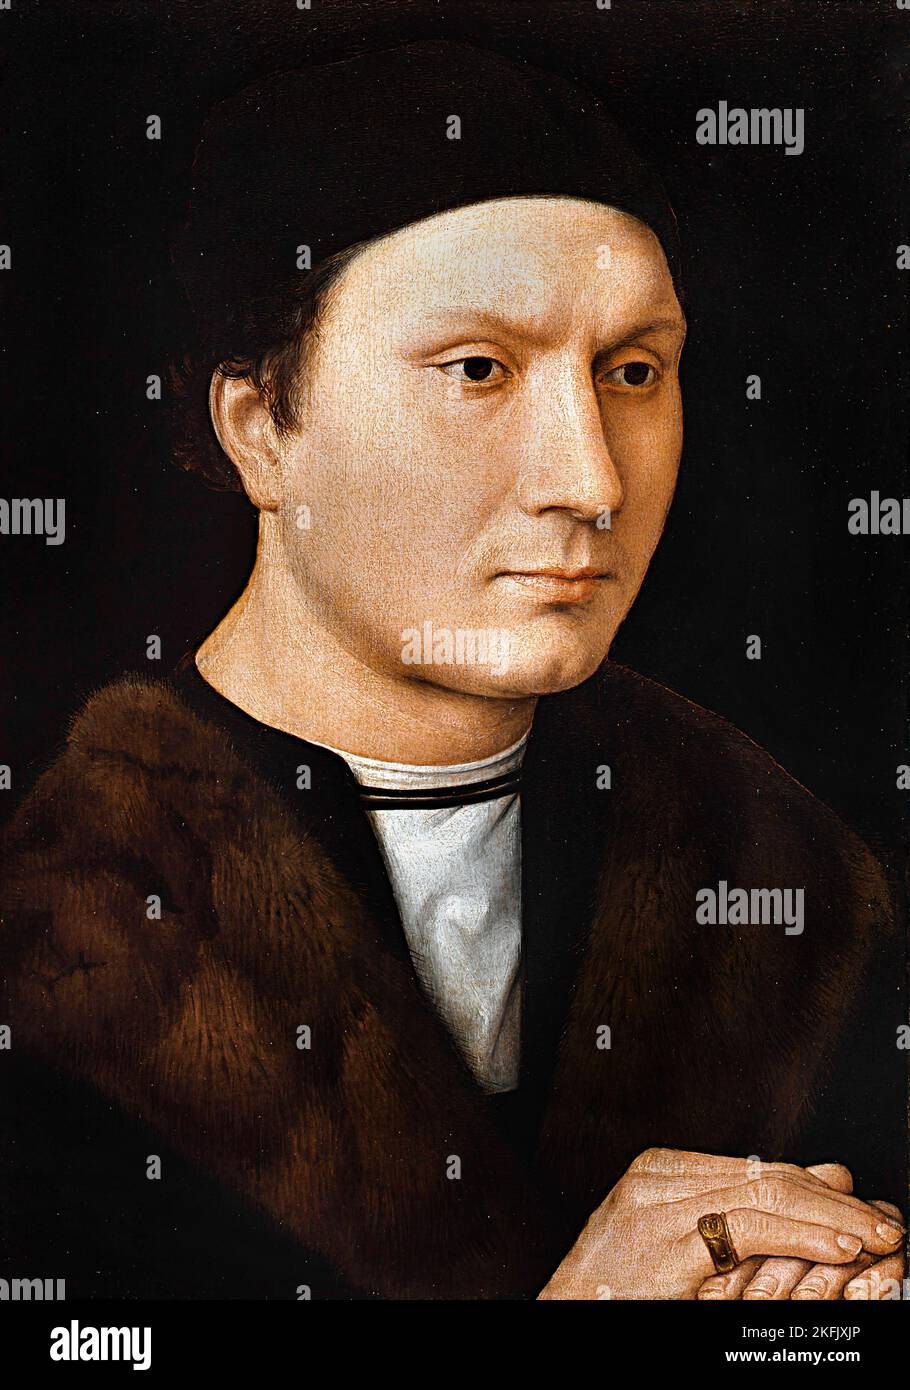 Hans Memling; Portrait of an Unknown Man; Circa 1490; Oil on panel; Uffizi Gallery, Florence, Italy. Stock Photo